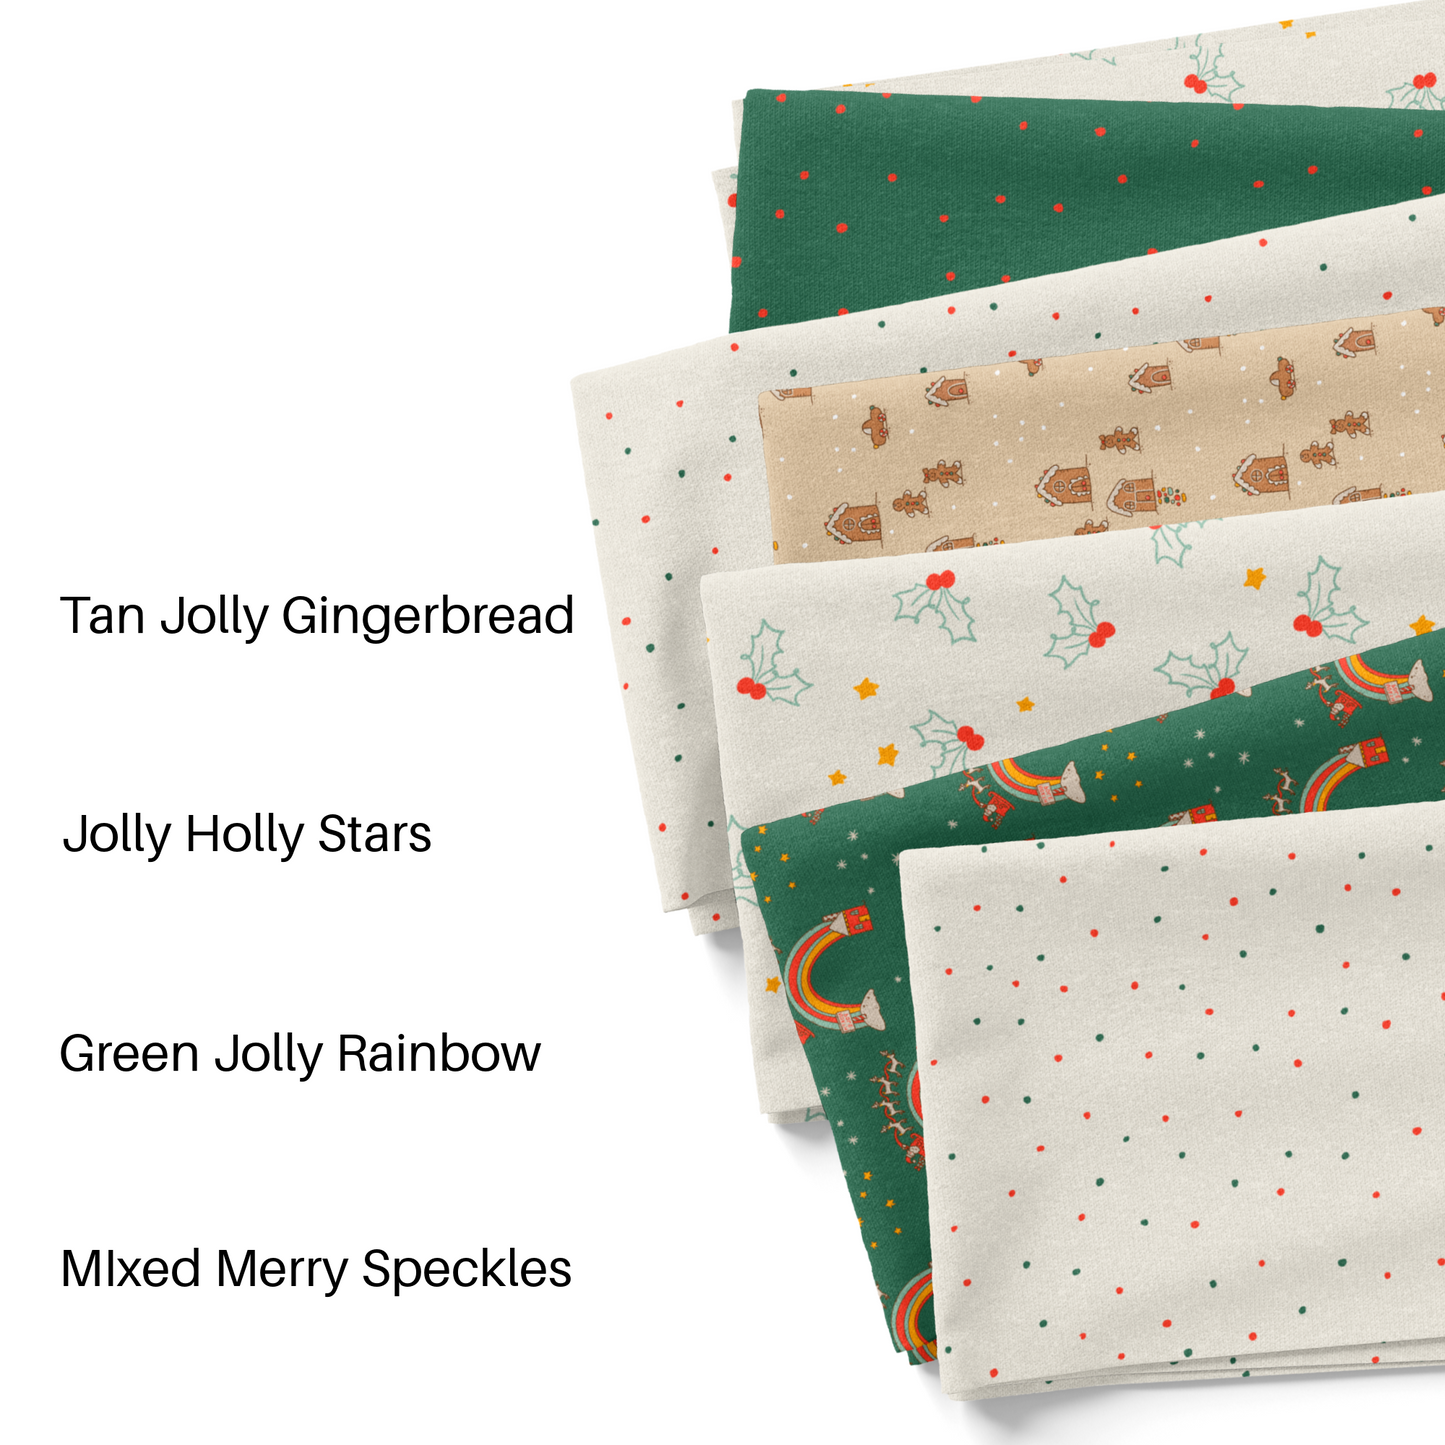 Cream and green Wild Daisy Gallery Christmas collection fabric swatches.